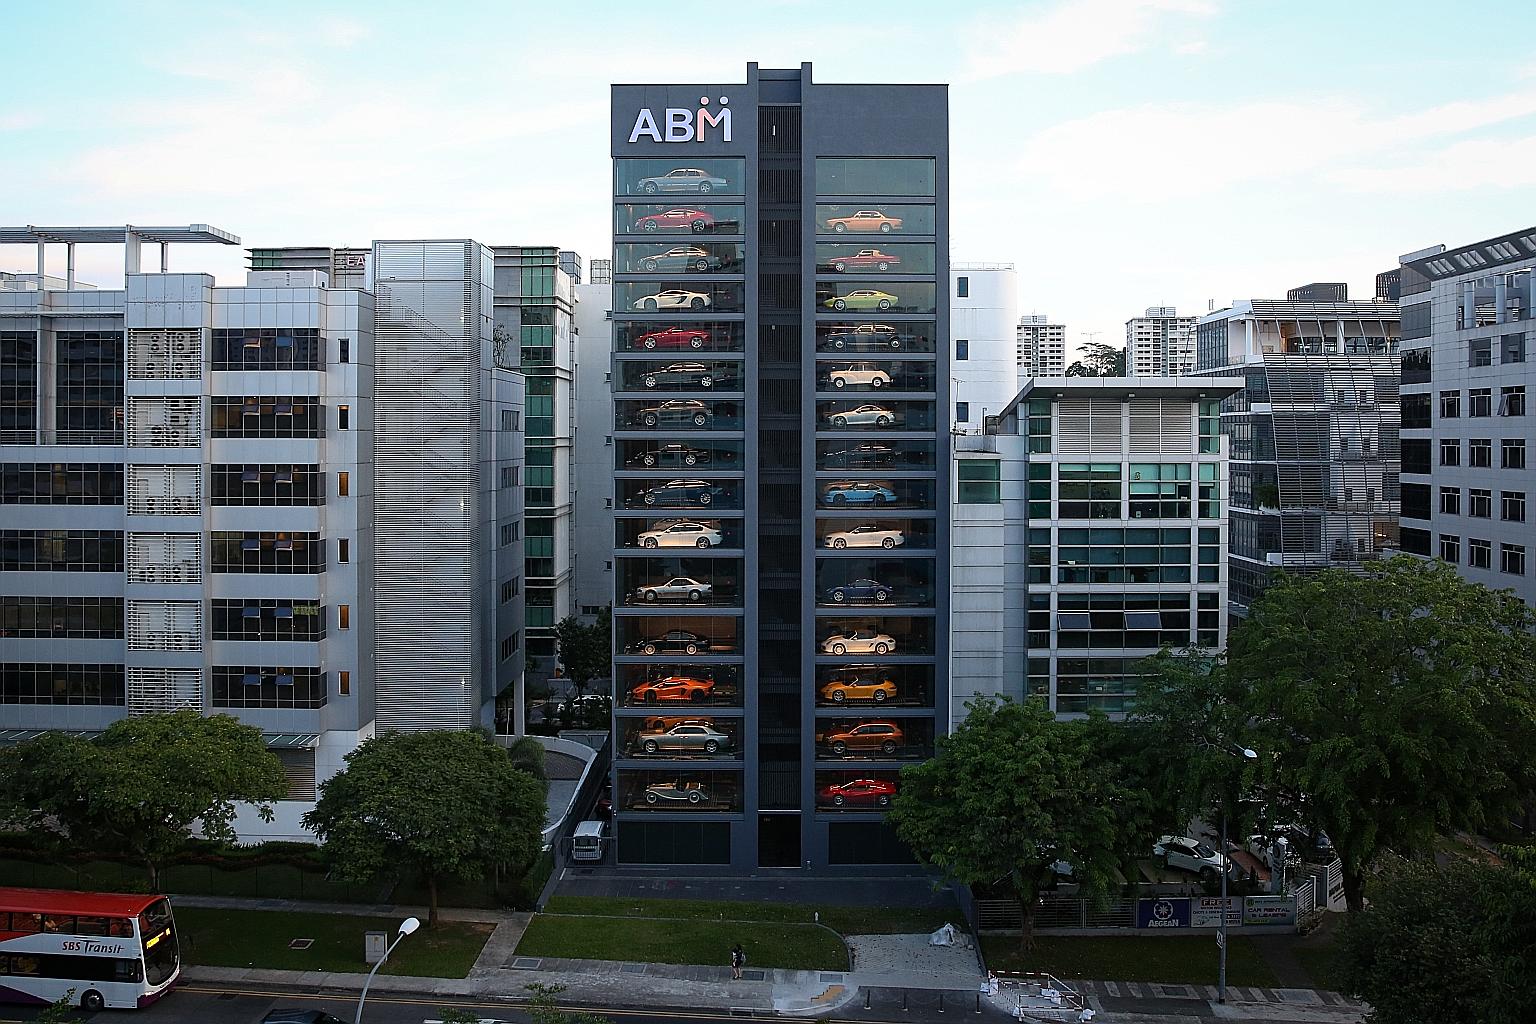 Singapore’s Super Vending Machine: A 15-Story Showroom for Luxury Cars